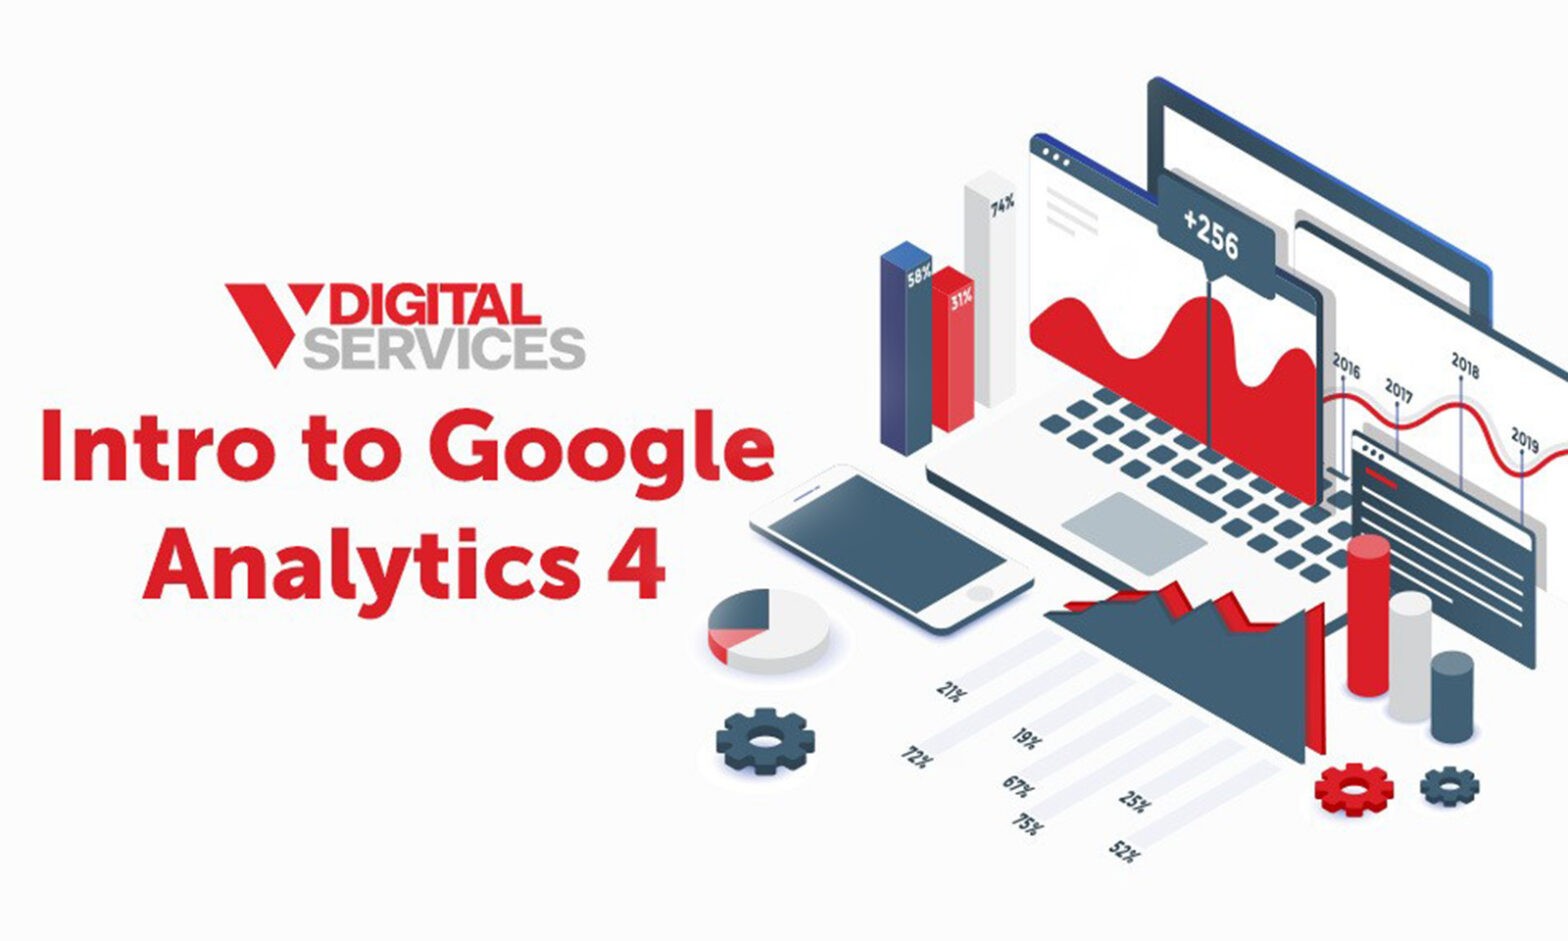 Featured image for post: Intro to Google Analytics 4